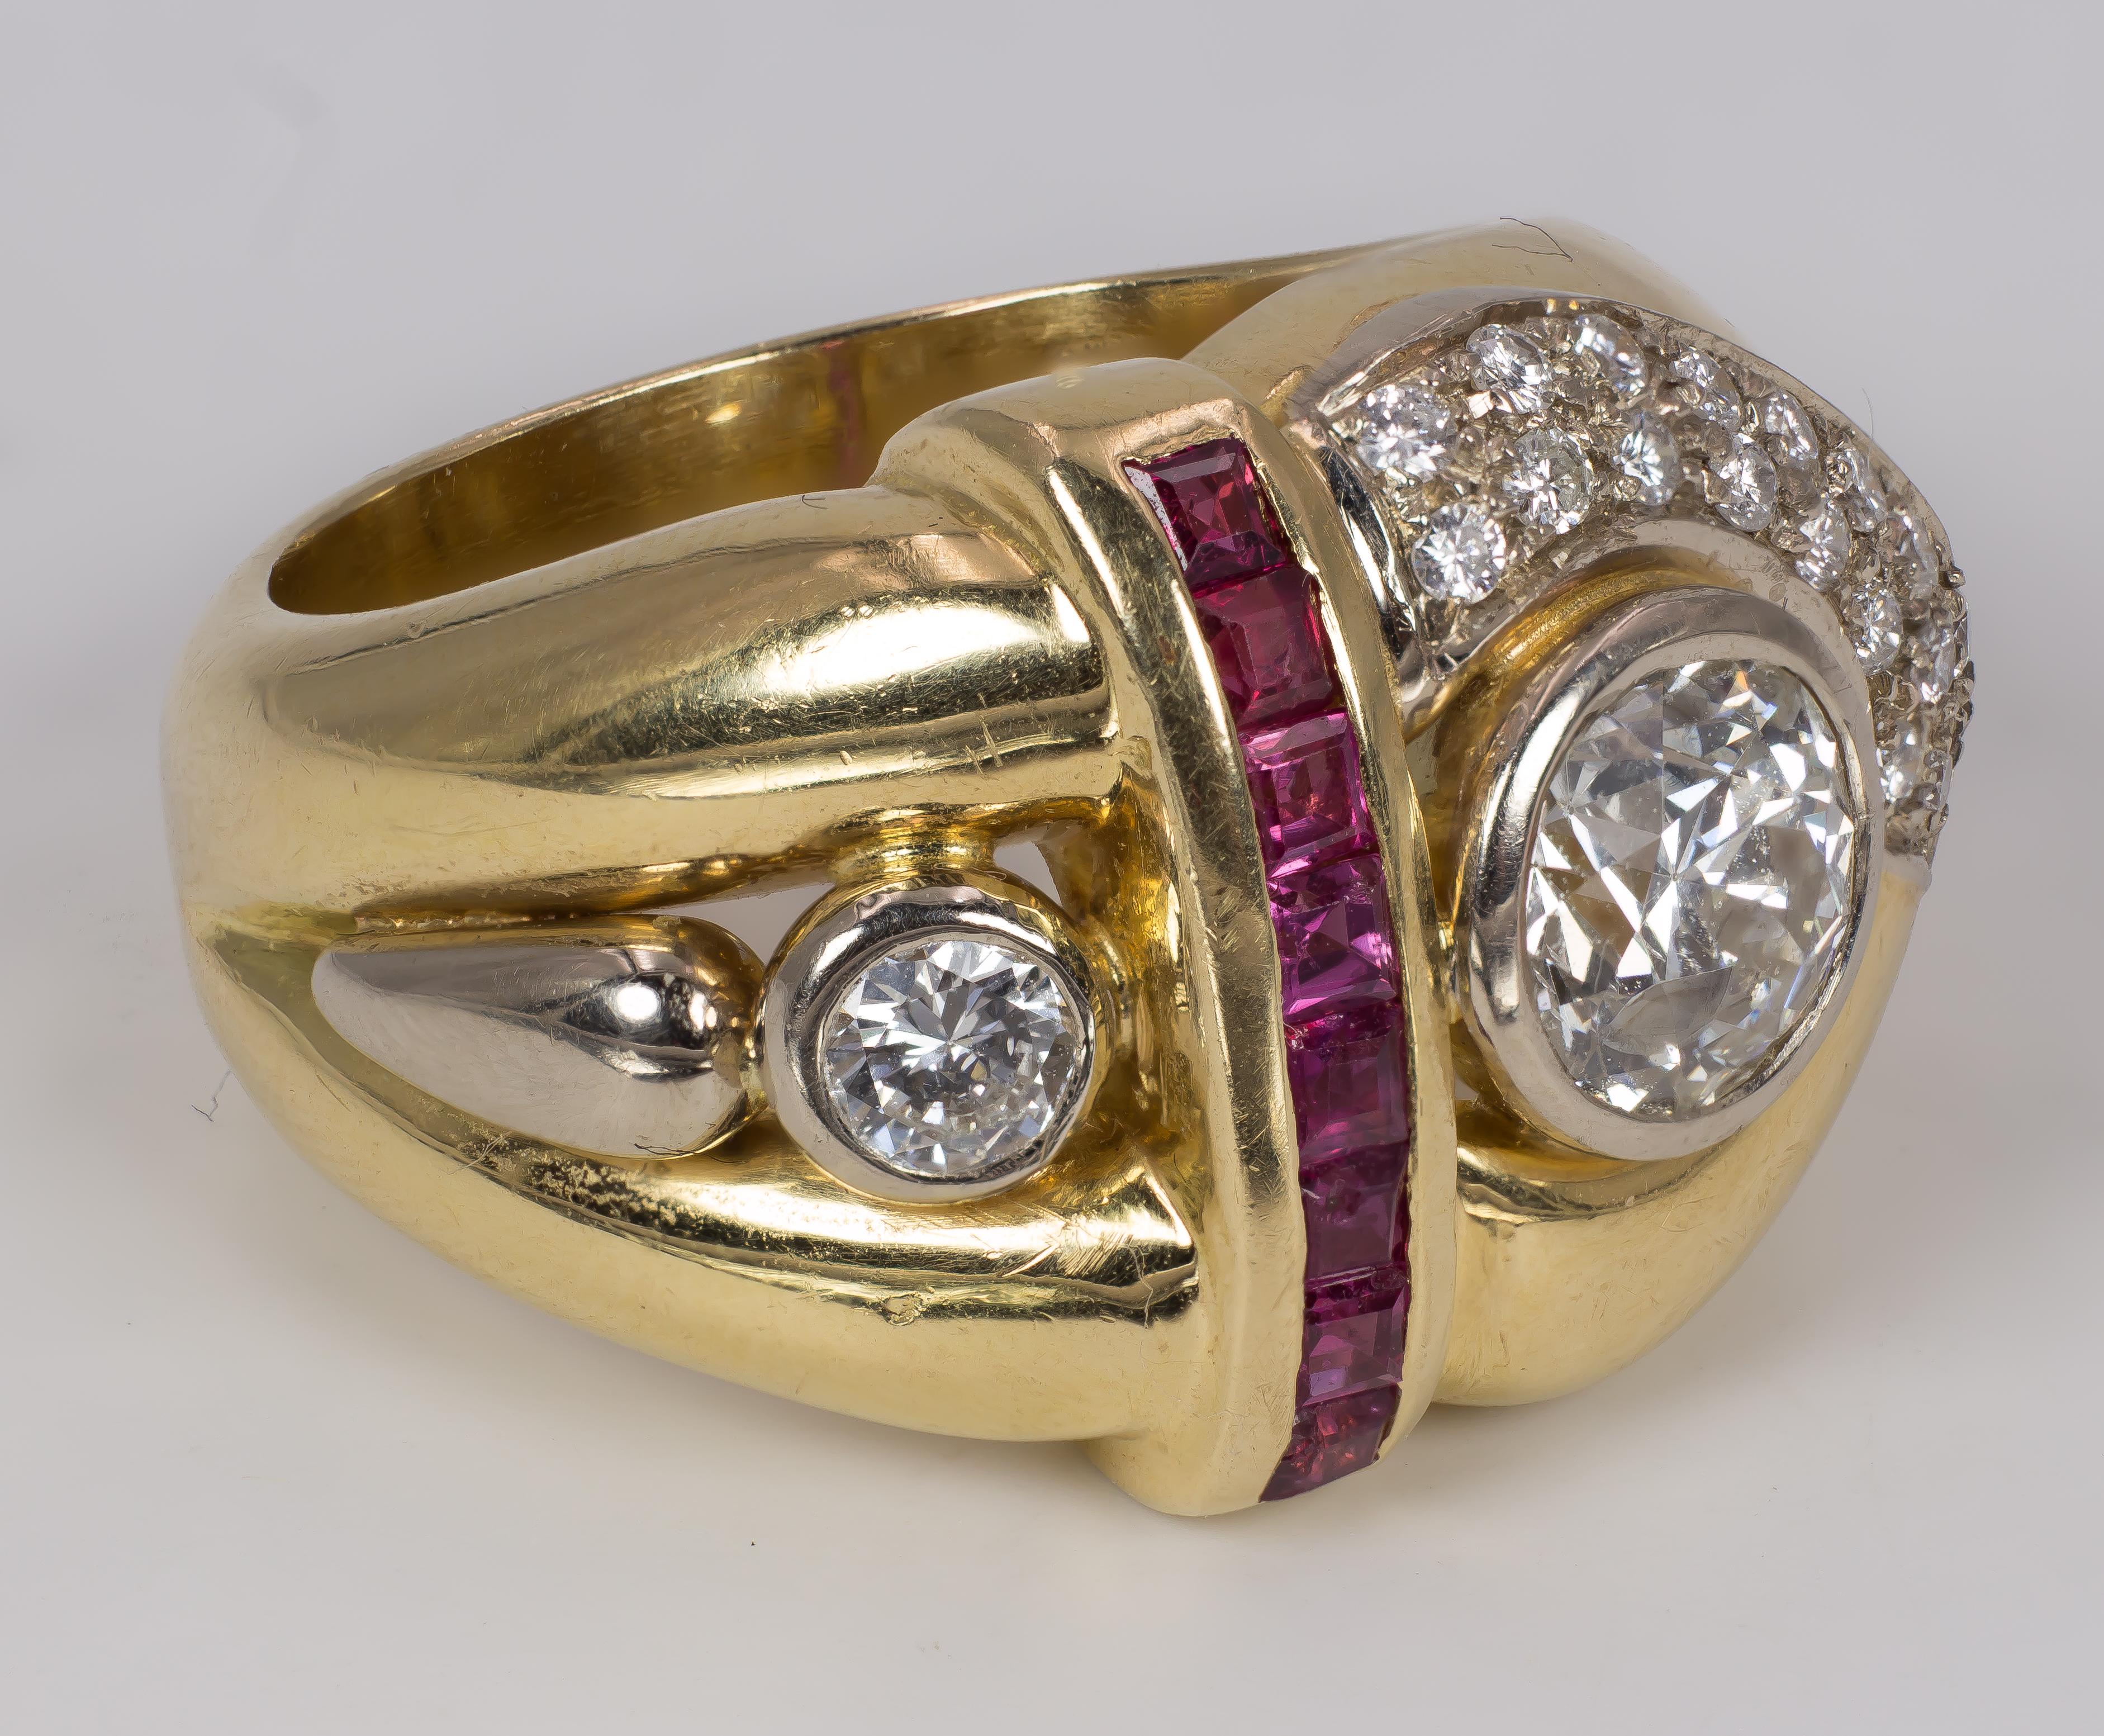 An incredible vintage ring, with a particular shape, crafted in 18K solid gold throughout.
It features two principal round cut diamonds: the biggest one is at least 1ct, while the smallest one is 0.15ct. The set of diamonds is completed with a pavé